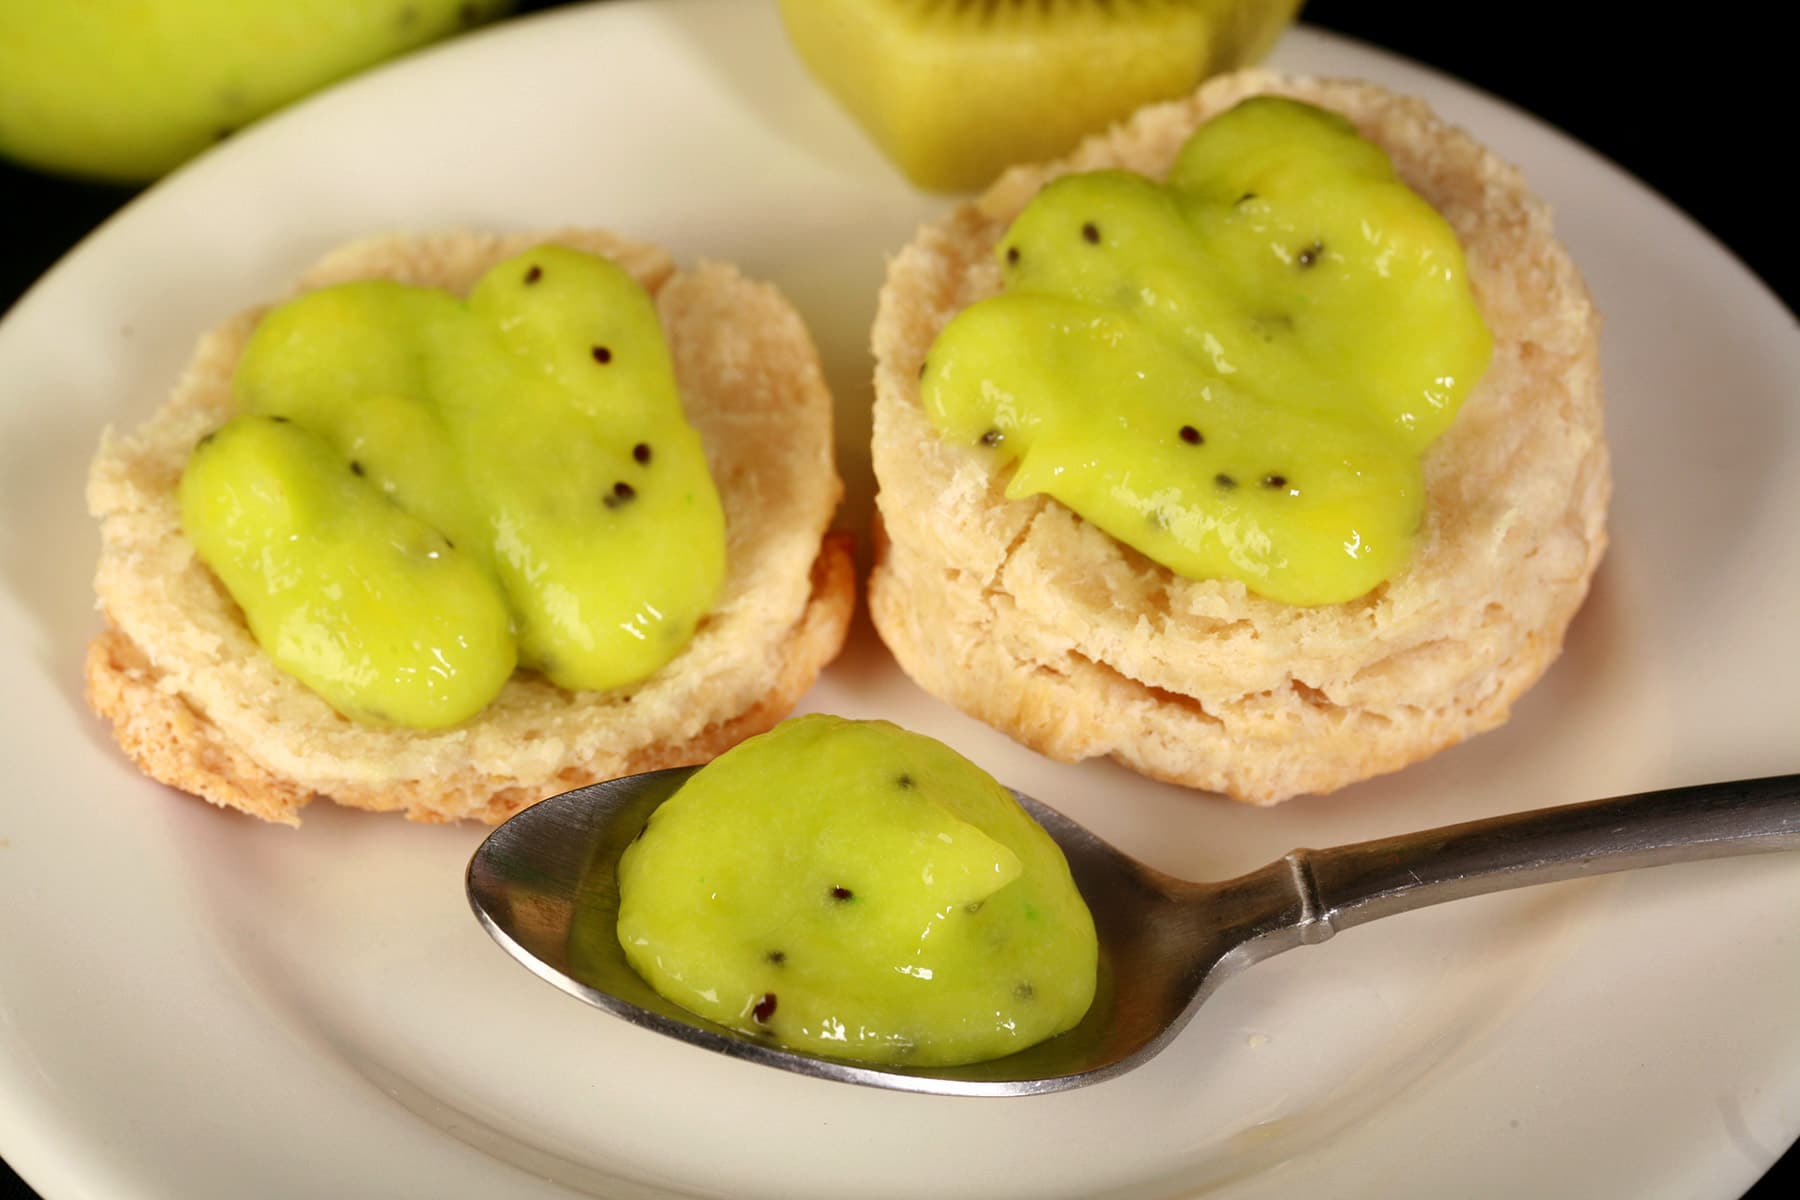 2 biscuits topped with kiwi curd, along with a spoon of curd on the same plate.